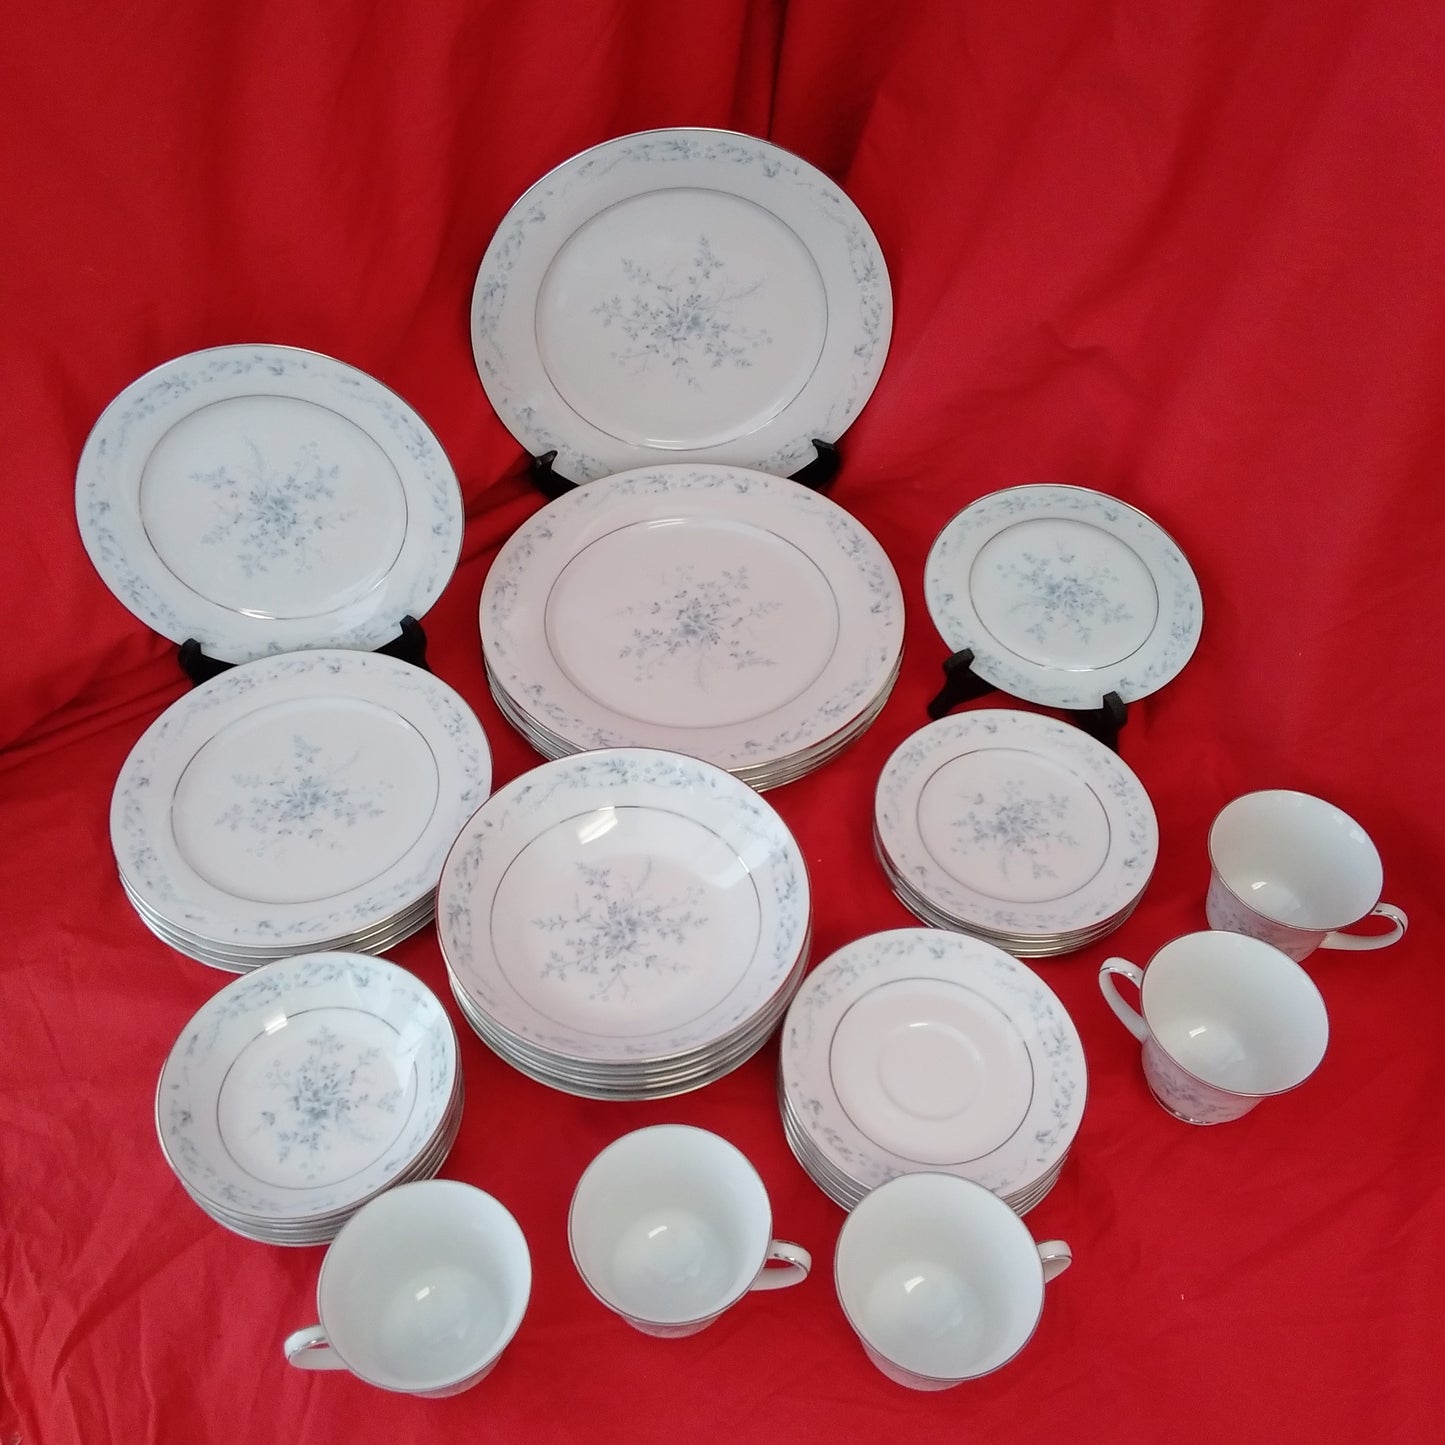 Carolyn by Noritake #2693 - Lot of 5 (7 piece place settings) 35 Pieces